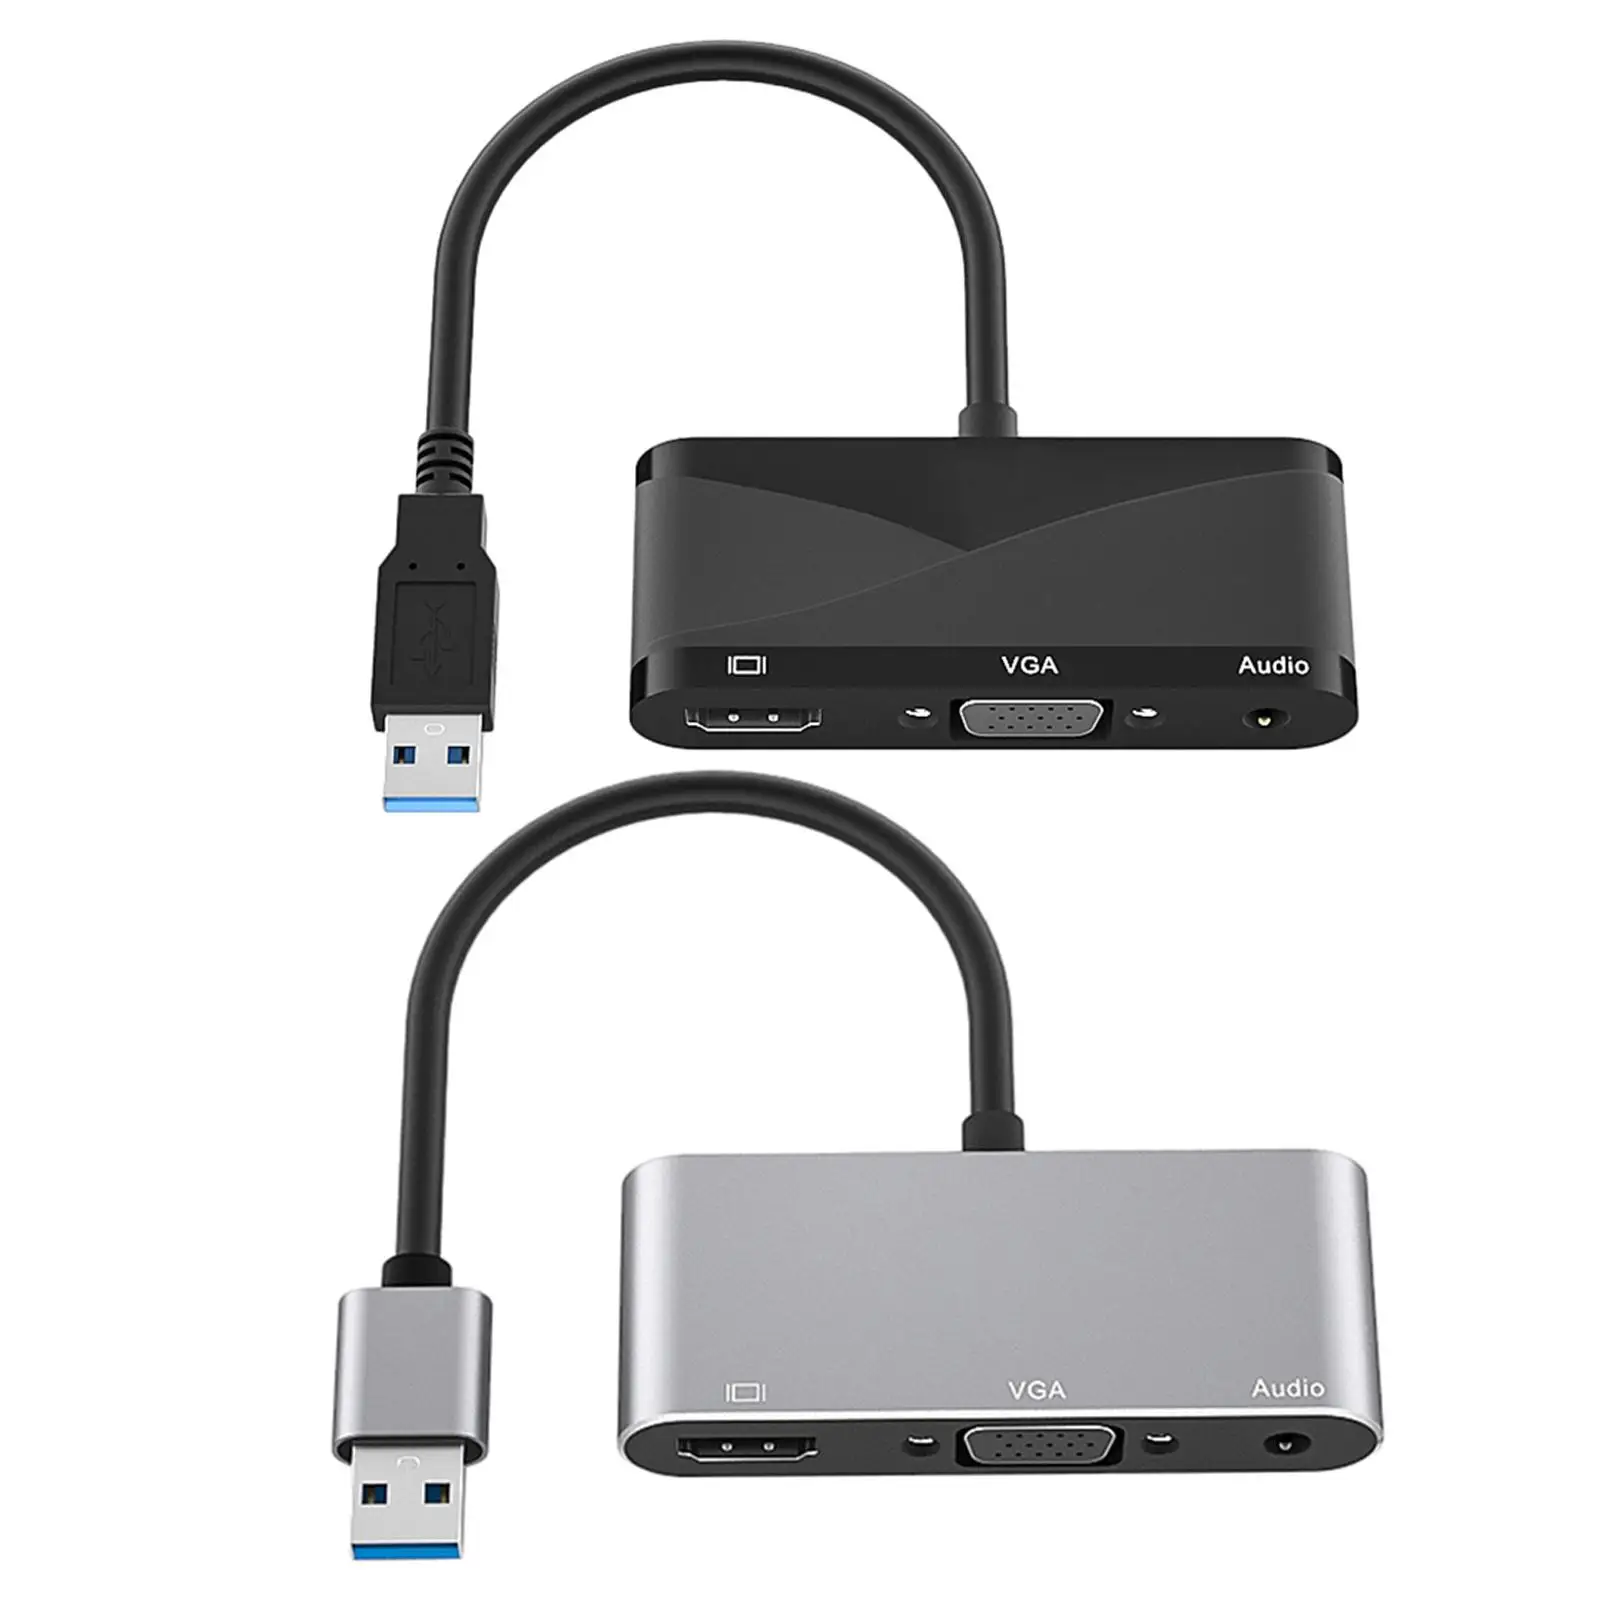 USB 3.0 to VGA Adapter and VGA Sync Output with Audio Output Support Windows 10 8 7 Audio Video Converter for Desktop